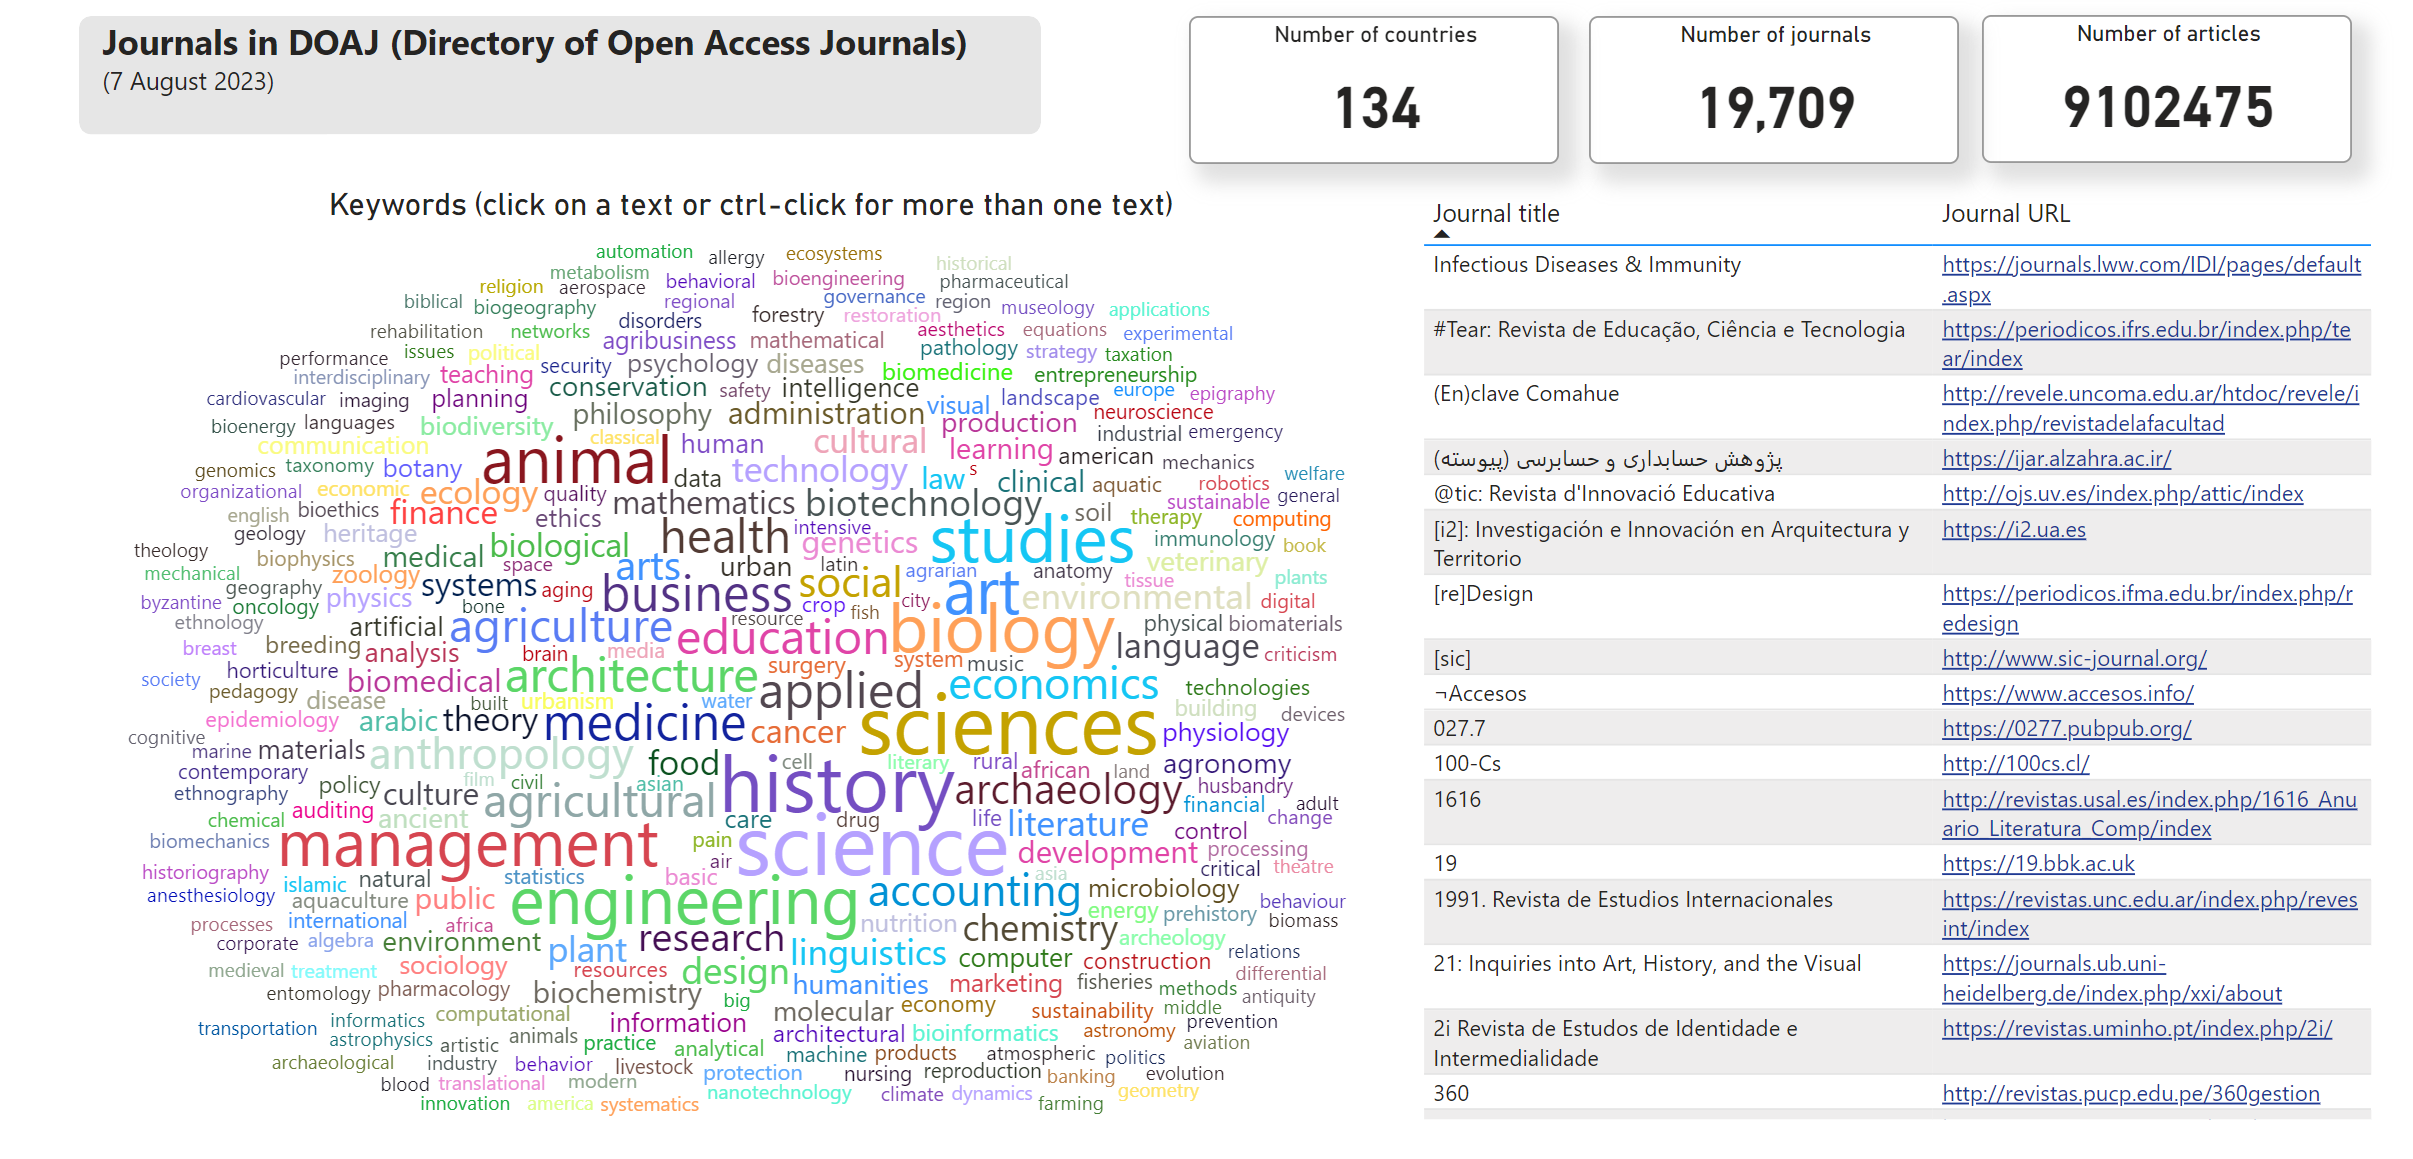 Screenshot from Ikhwan's data visualisation showing a word cloud of the keywords of DOAJ-indexed journals.